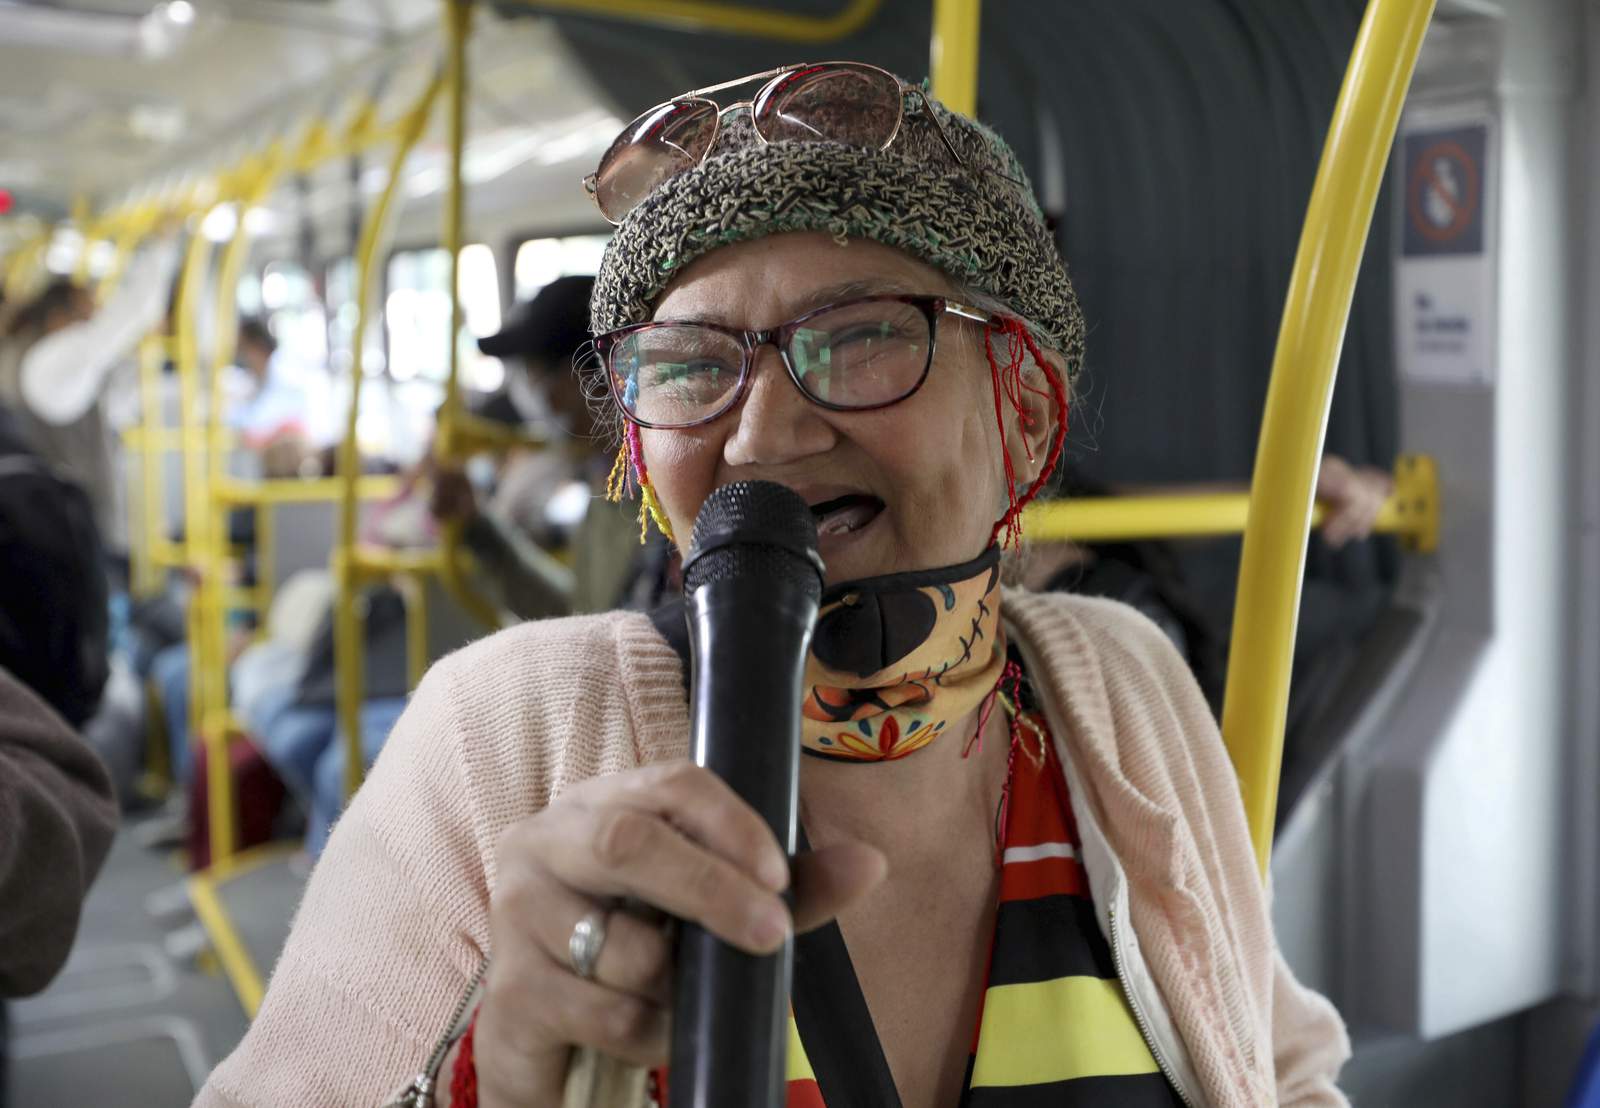 "Toothless Cindy" raps on Colombian buses to make ends meet